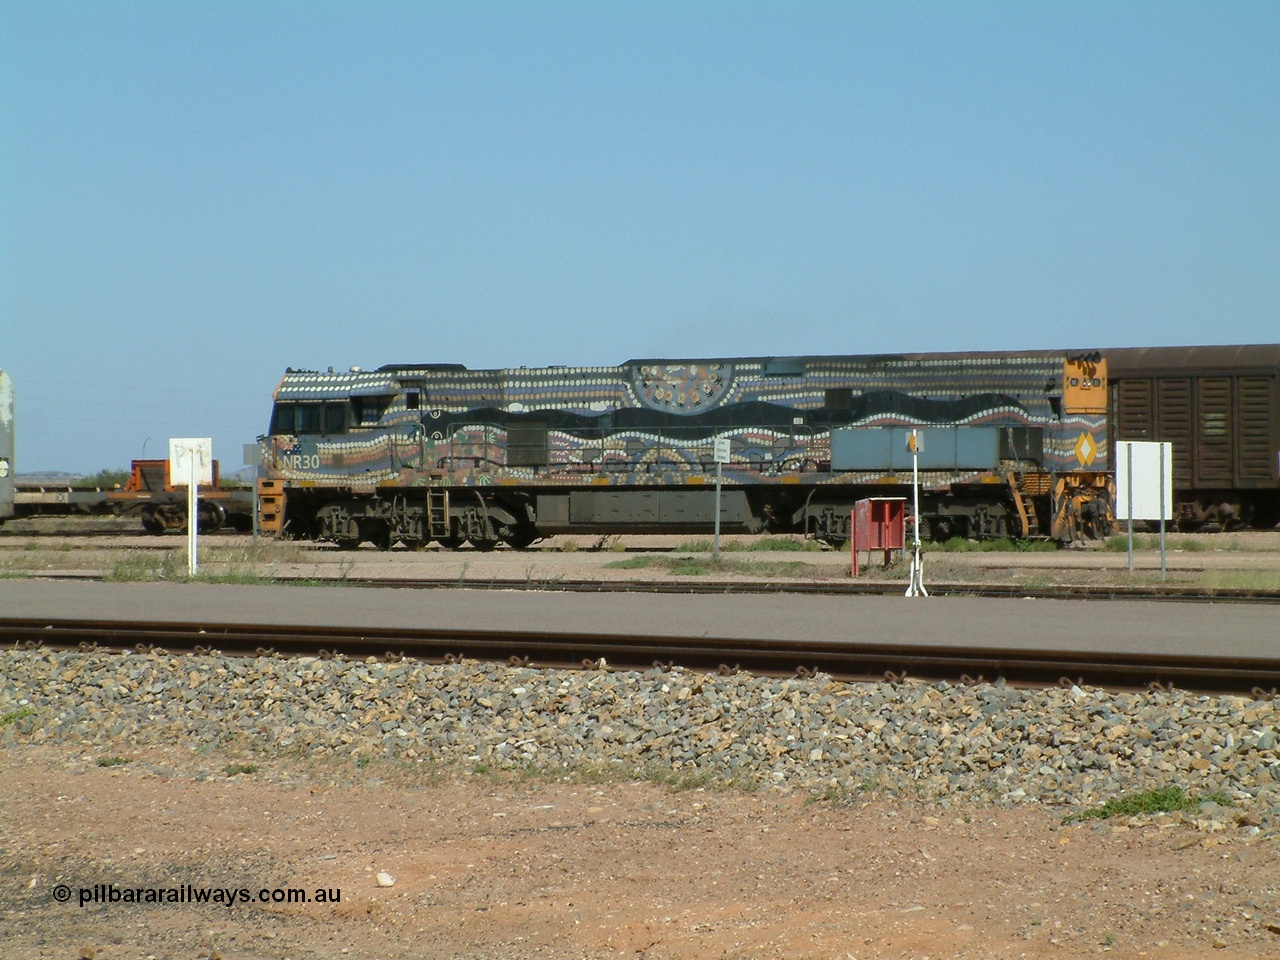 030404 103000
Port Augusta, Goninan built GE model Cv40-9i NR class unit NR 30 serial 7250-05 / 97-232 was painted in a Bessie Liddle of Alice Springs designed aboriginal livery titled 'Warmi' or the snake, John Moriarty of Balarinji Design did the artwork.
Keywords: NR-class;NR30;7250-05/97-232;Goninan;GE;Cv40-9i;